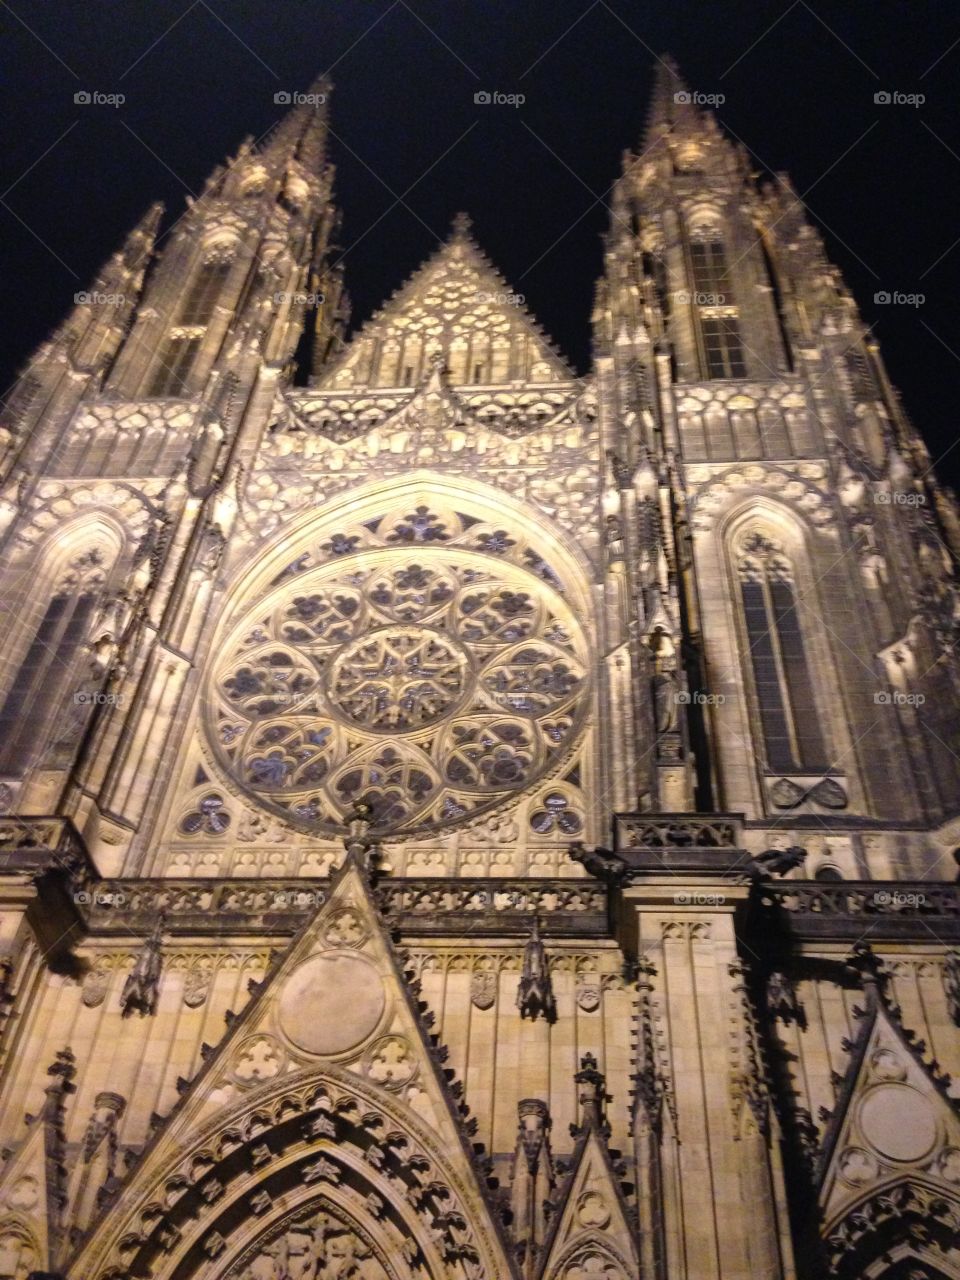 Looking up in Prague. Looking up at the Cathedral in Prague Castle at night.